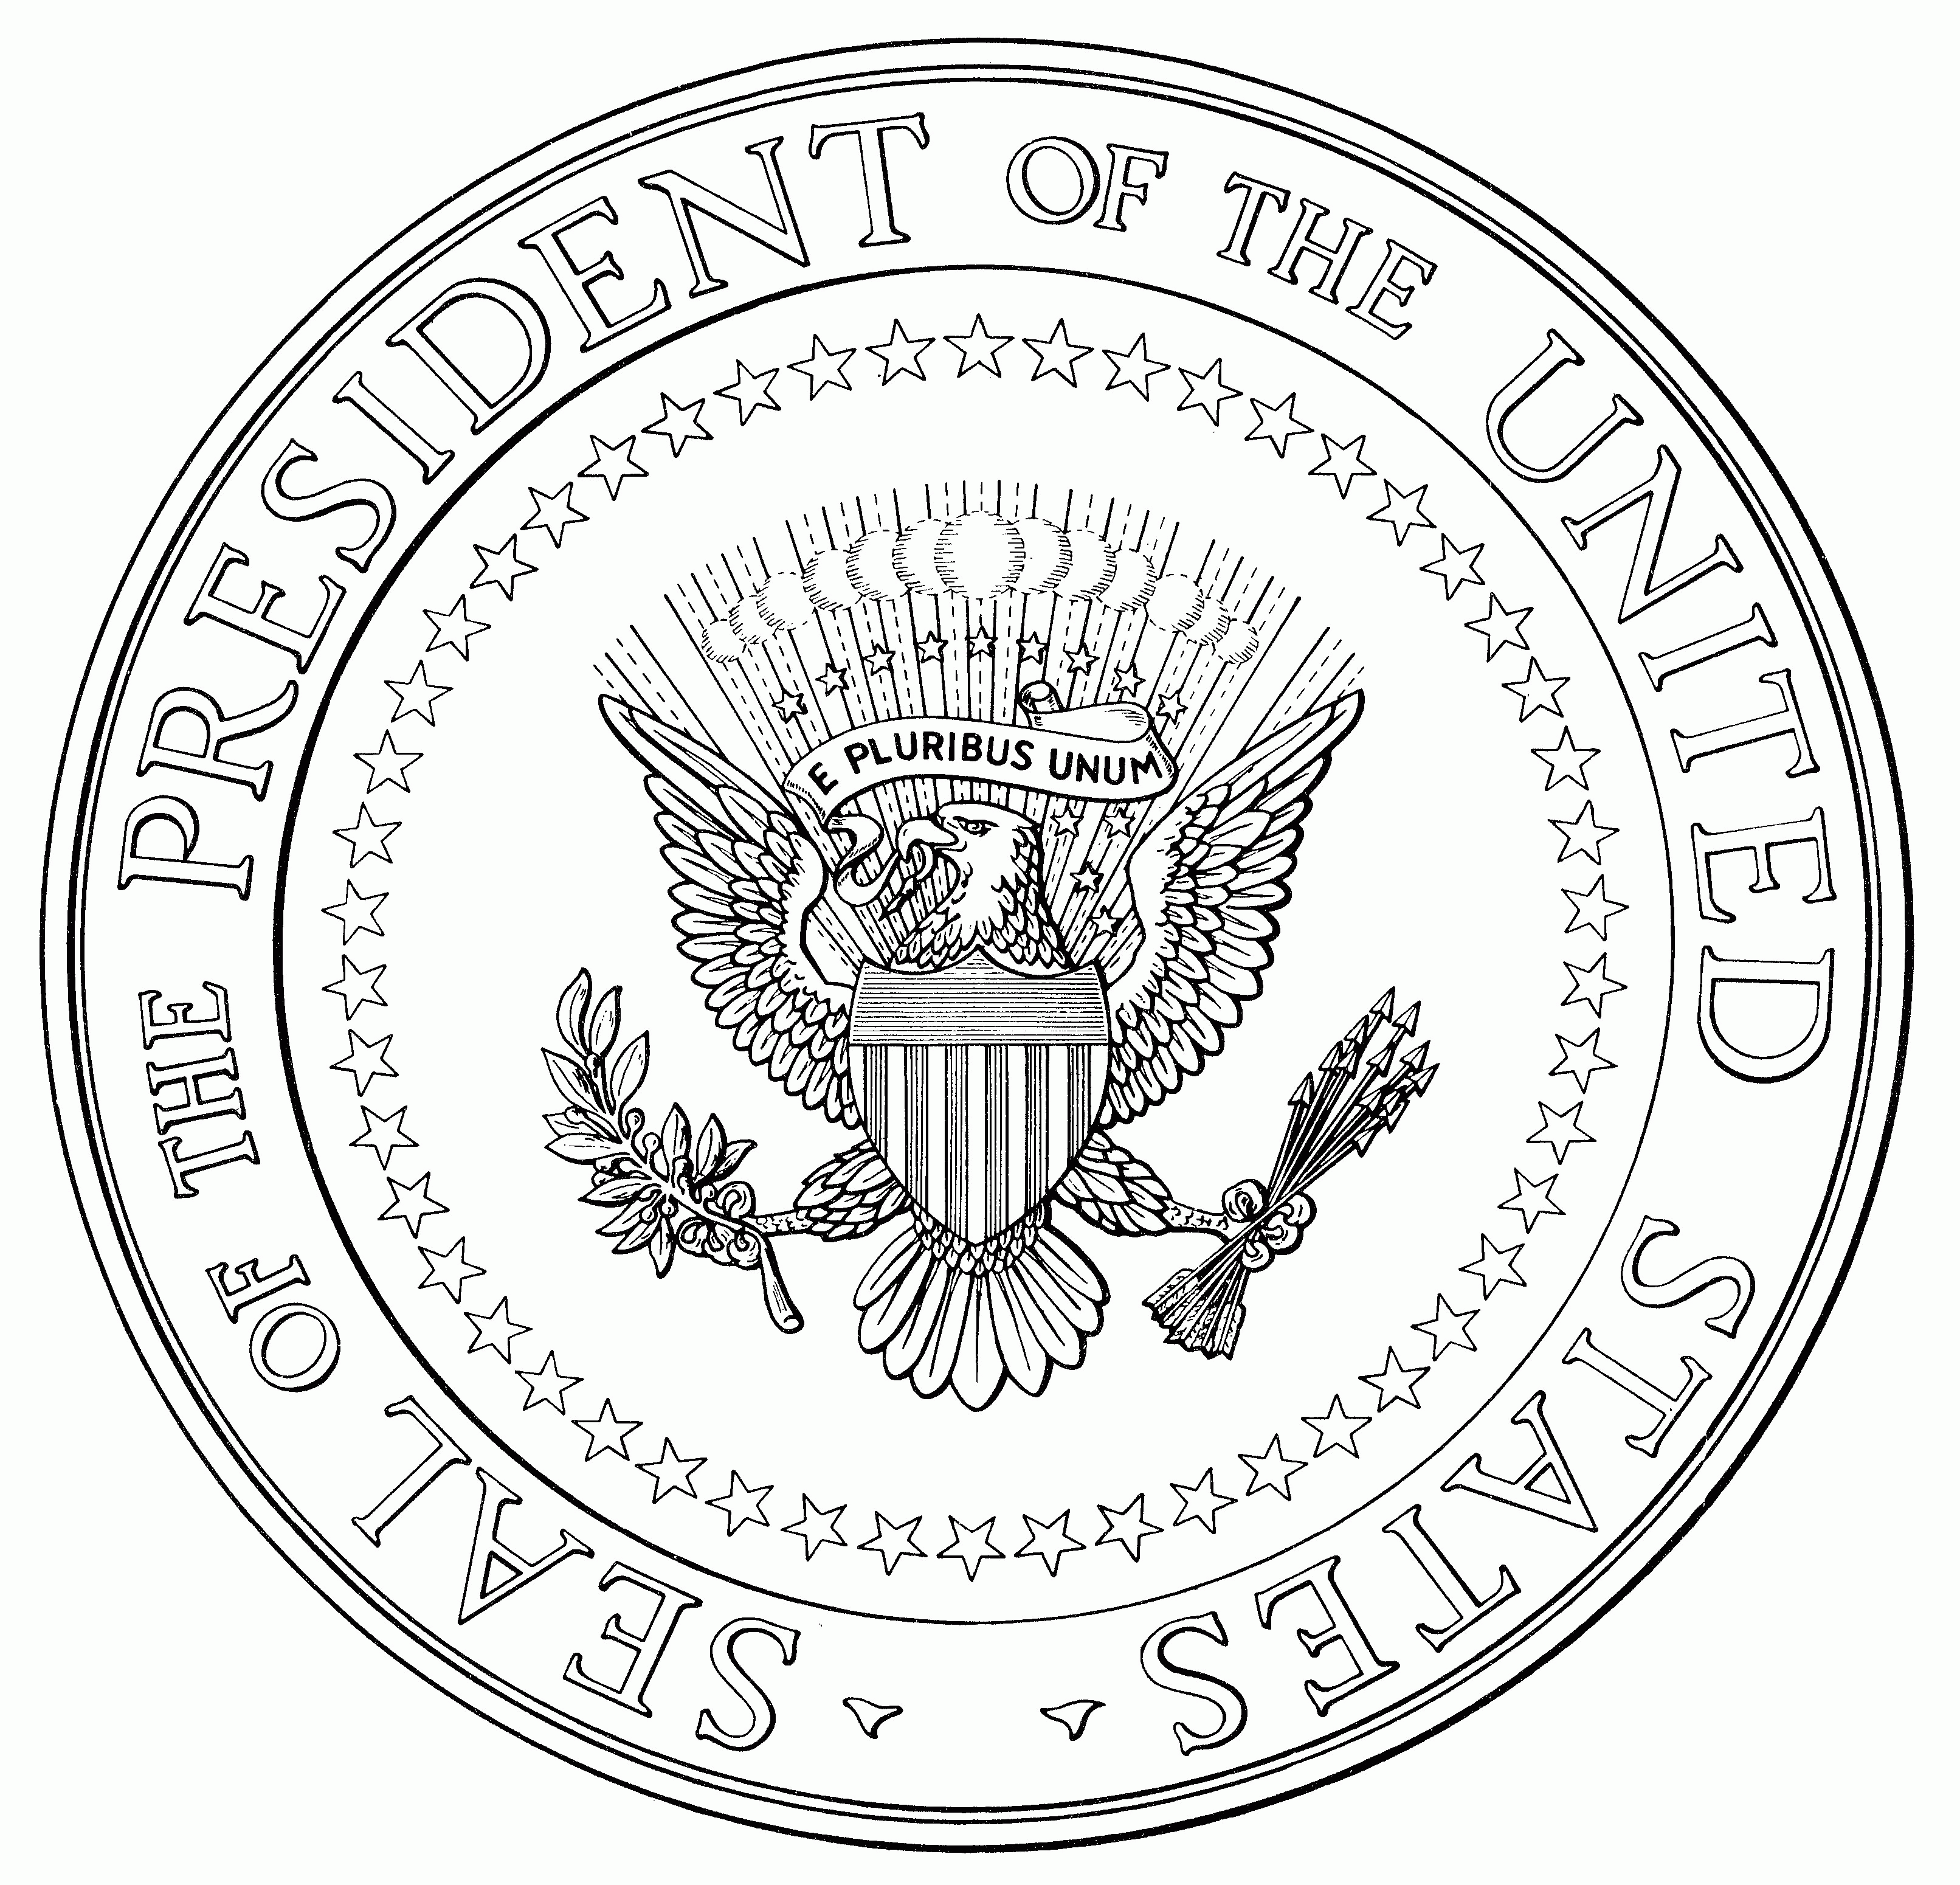 Seal of the president of the united states of america coloring sheet for kids